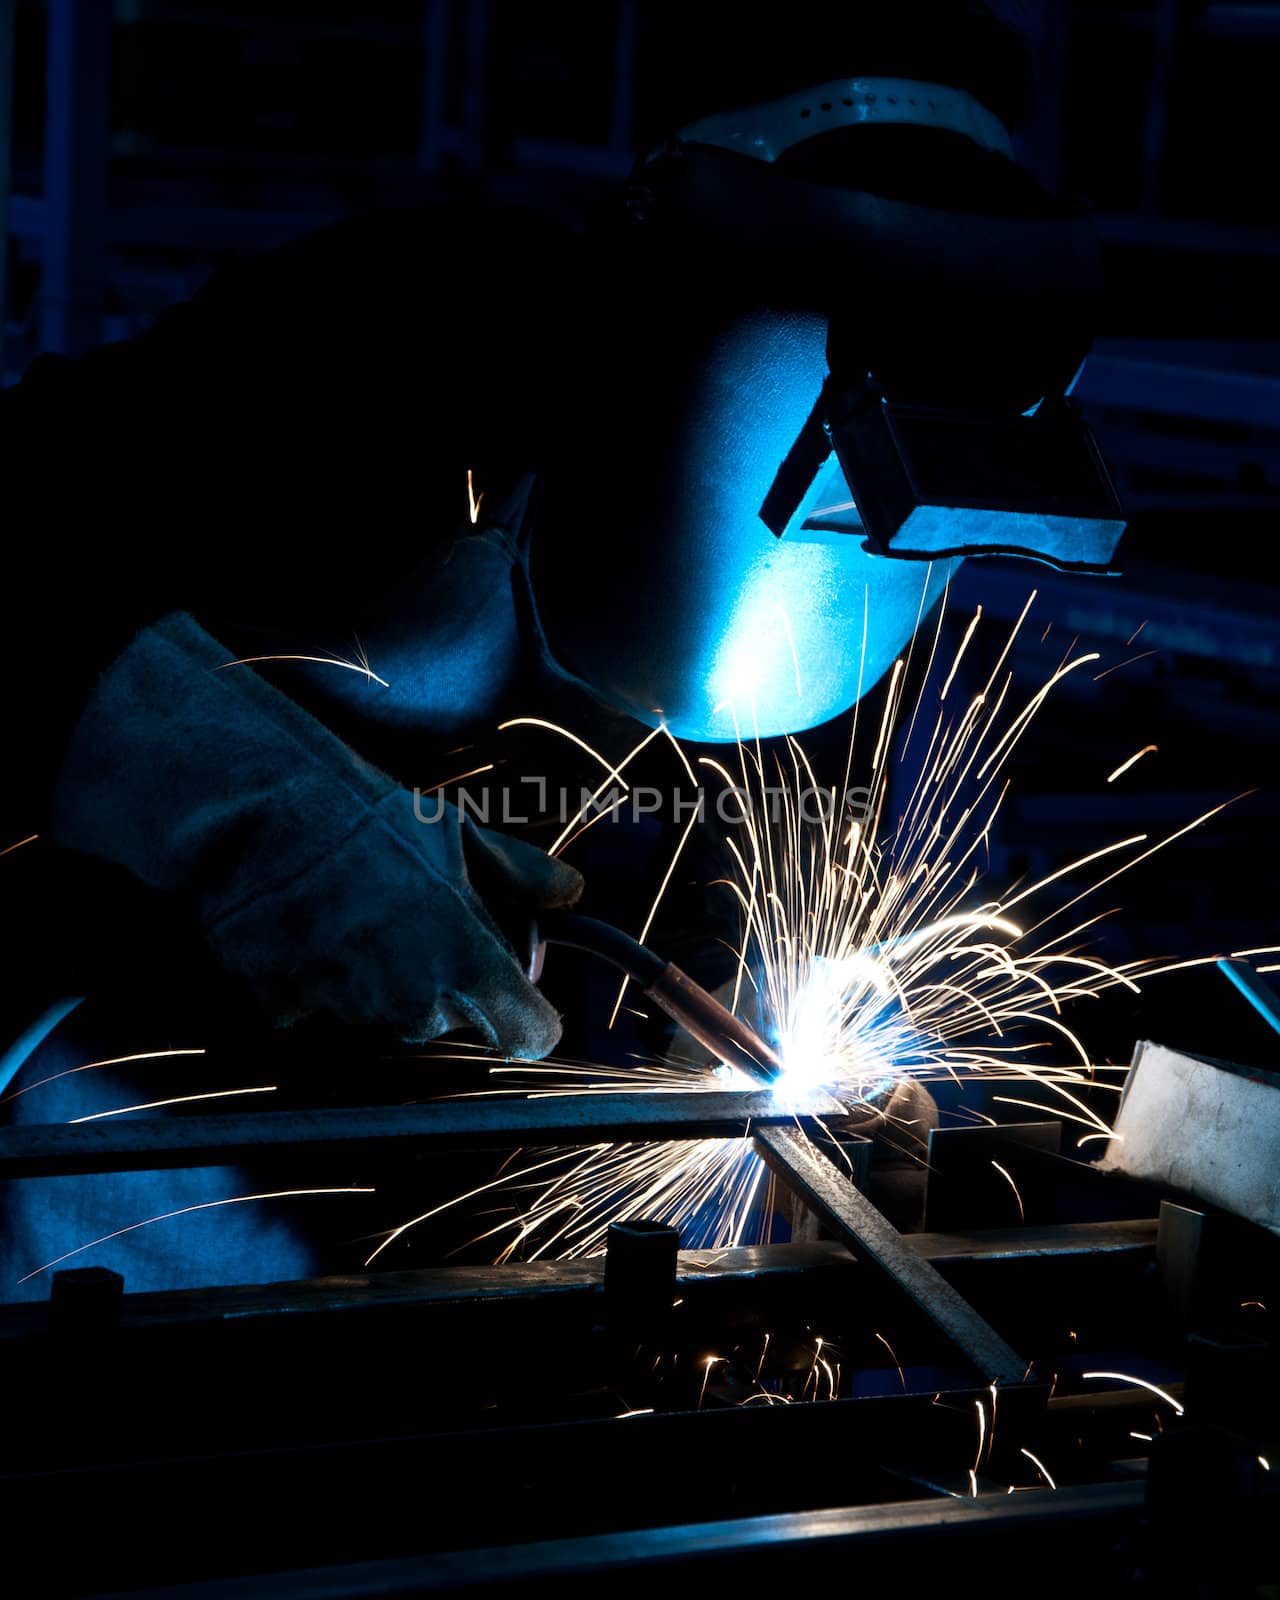 human working of welding with a lot of sparks in a metal industry factory